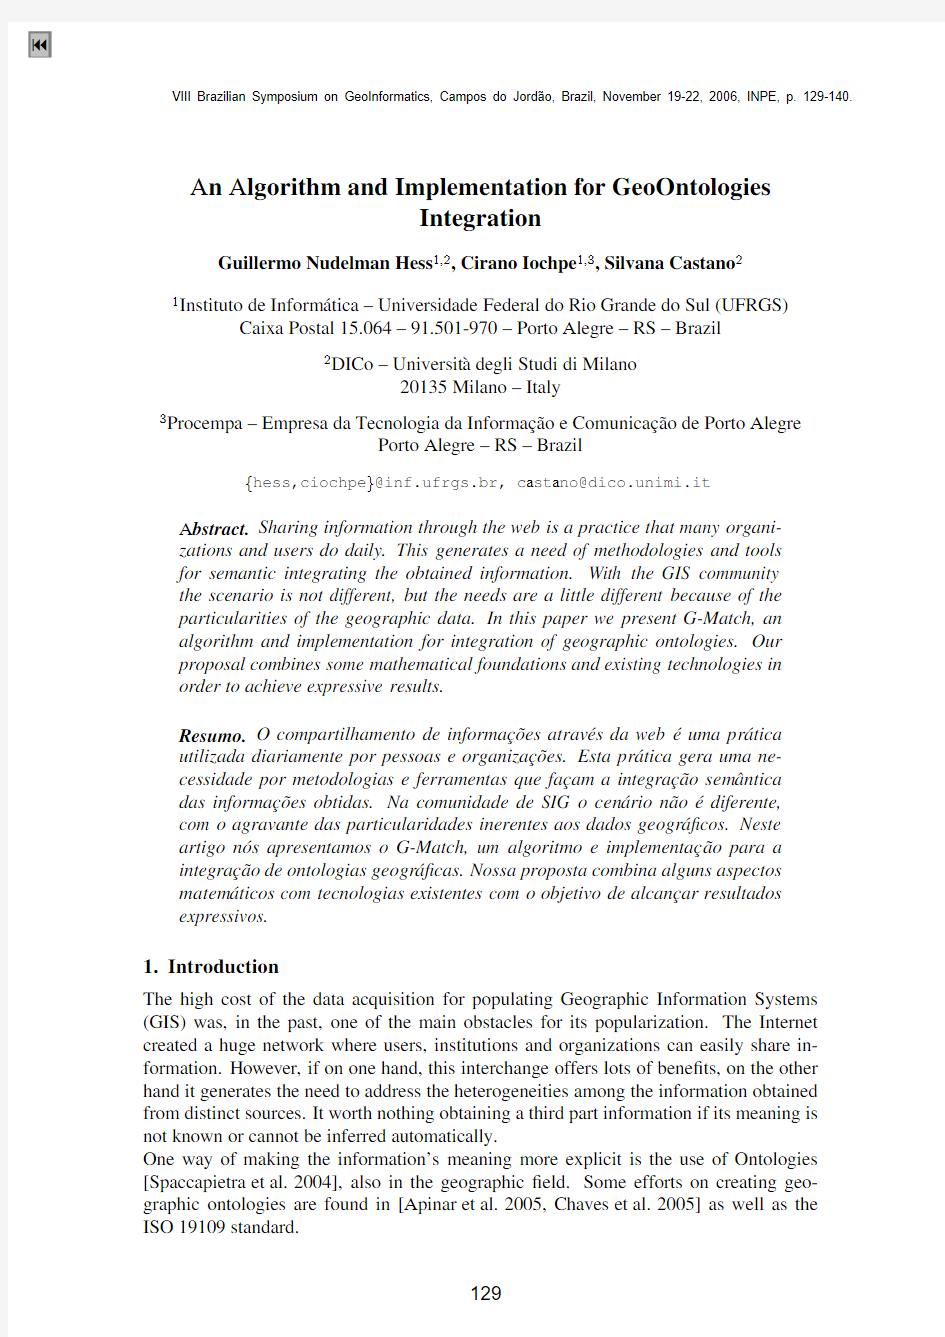 An Algorithm and Implementation for GeoOntologies Integration